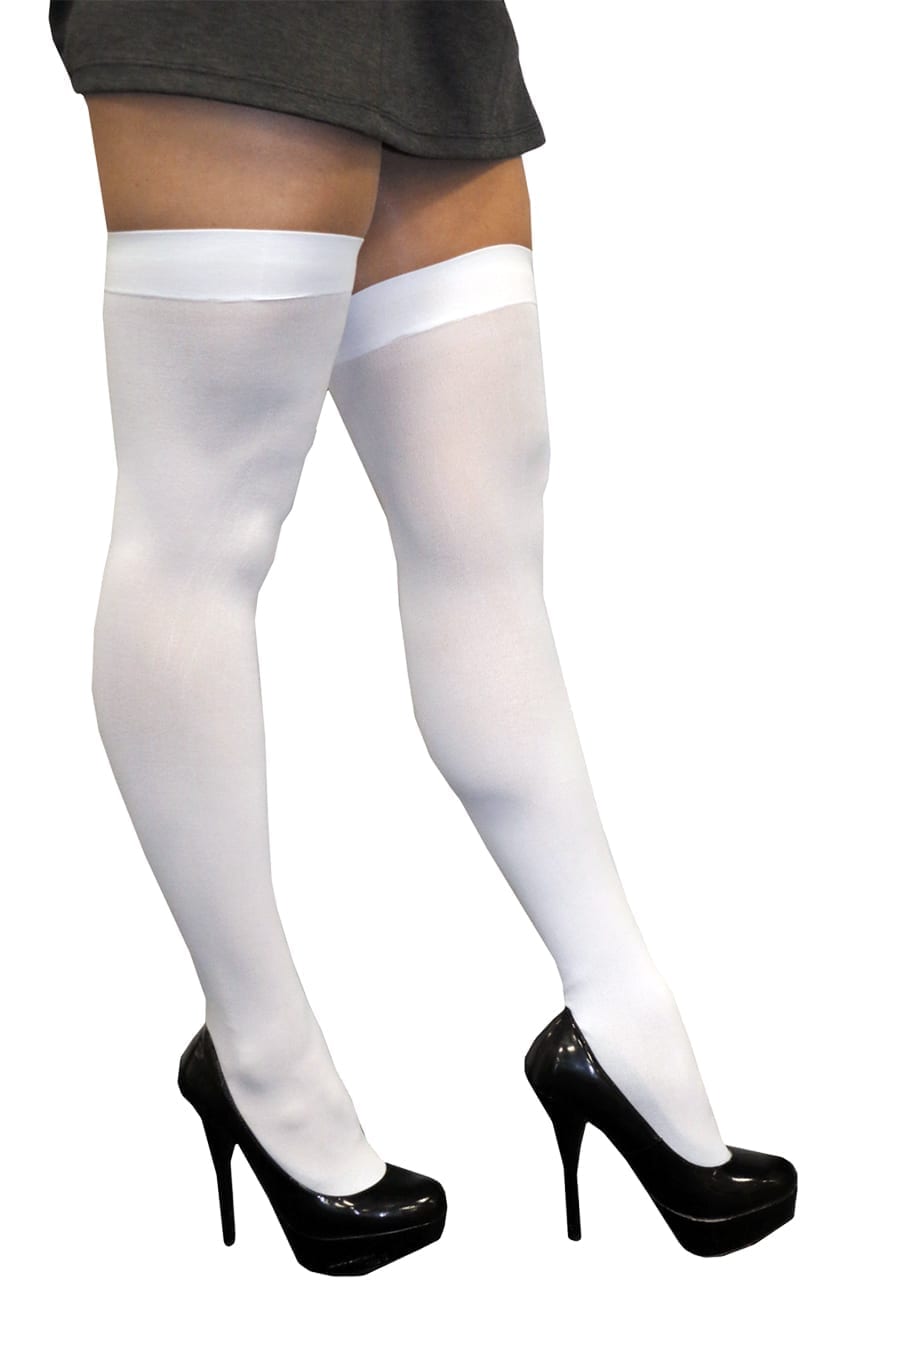 Featured image for “Thigh High Tights – White”